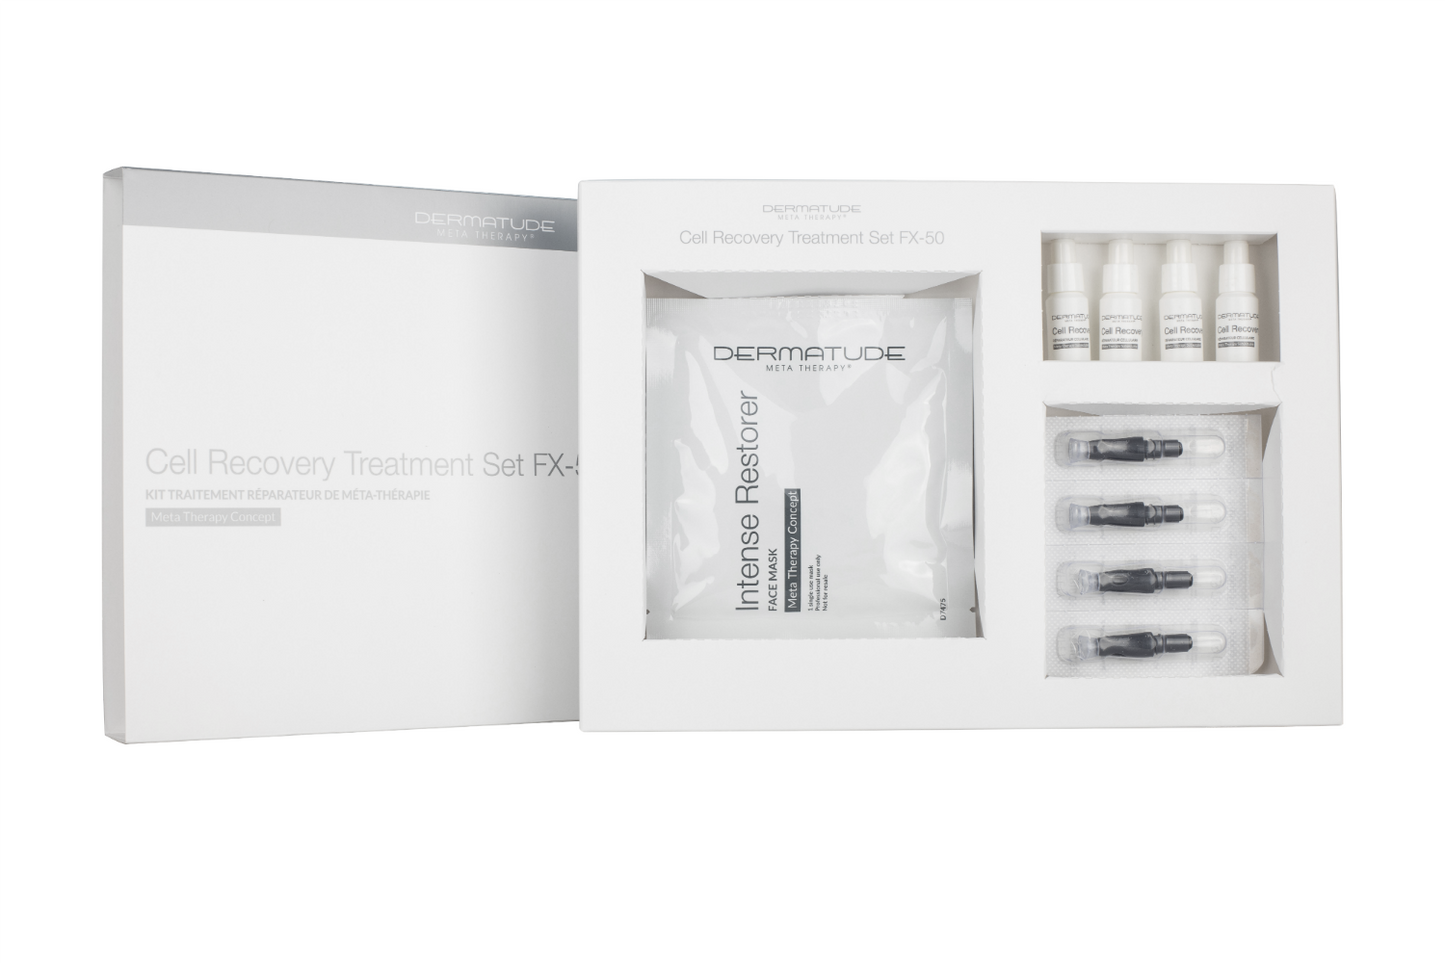 Dermatude FX-50 Cell Recovery Facial Treatment Set (4 treatments)